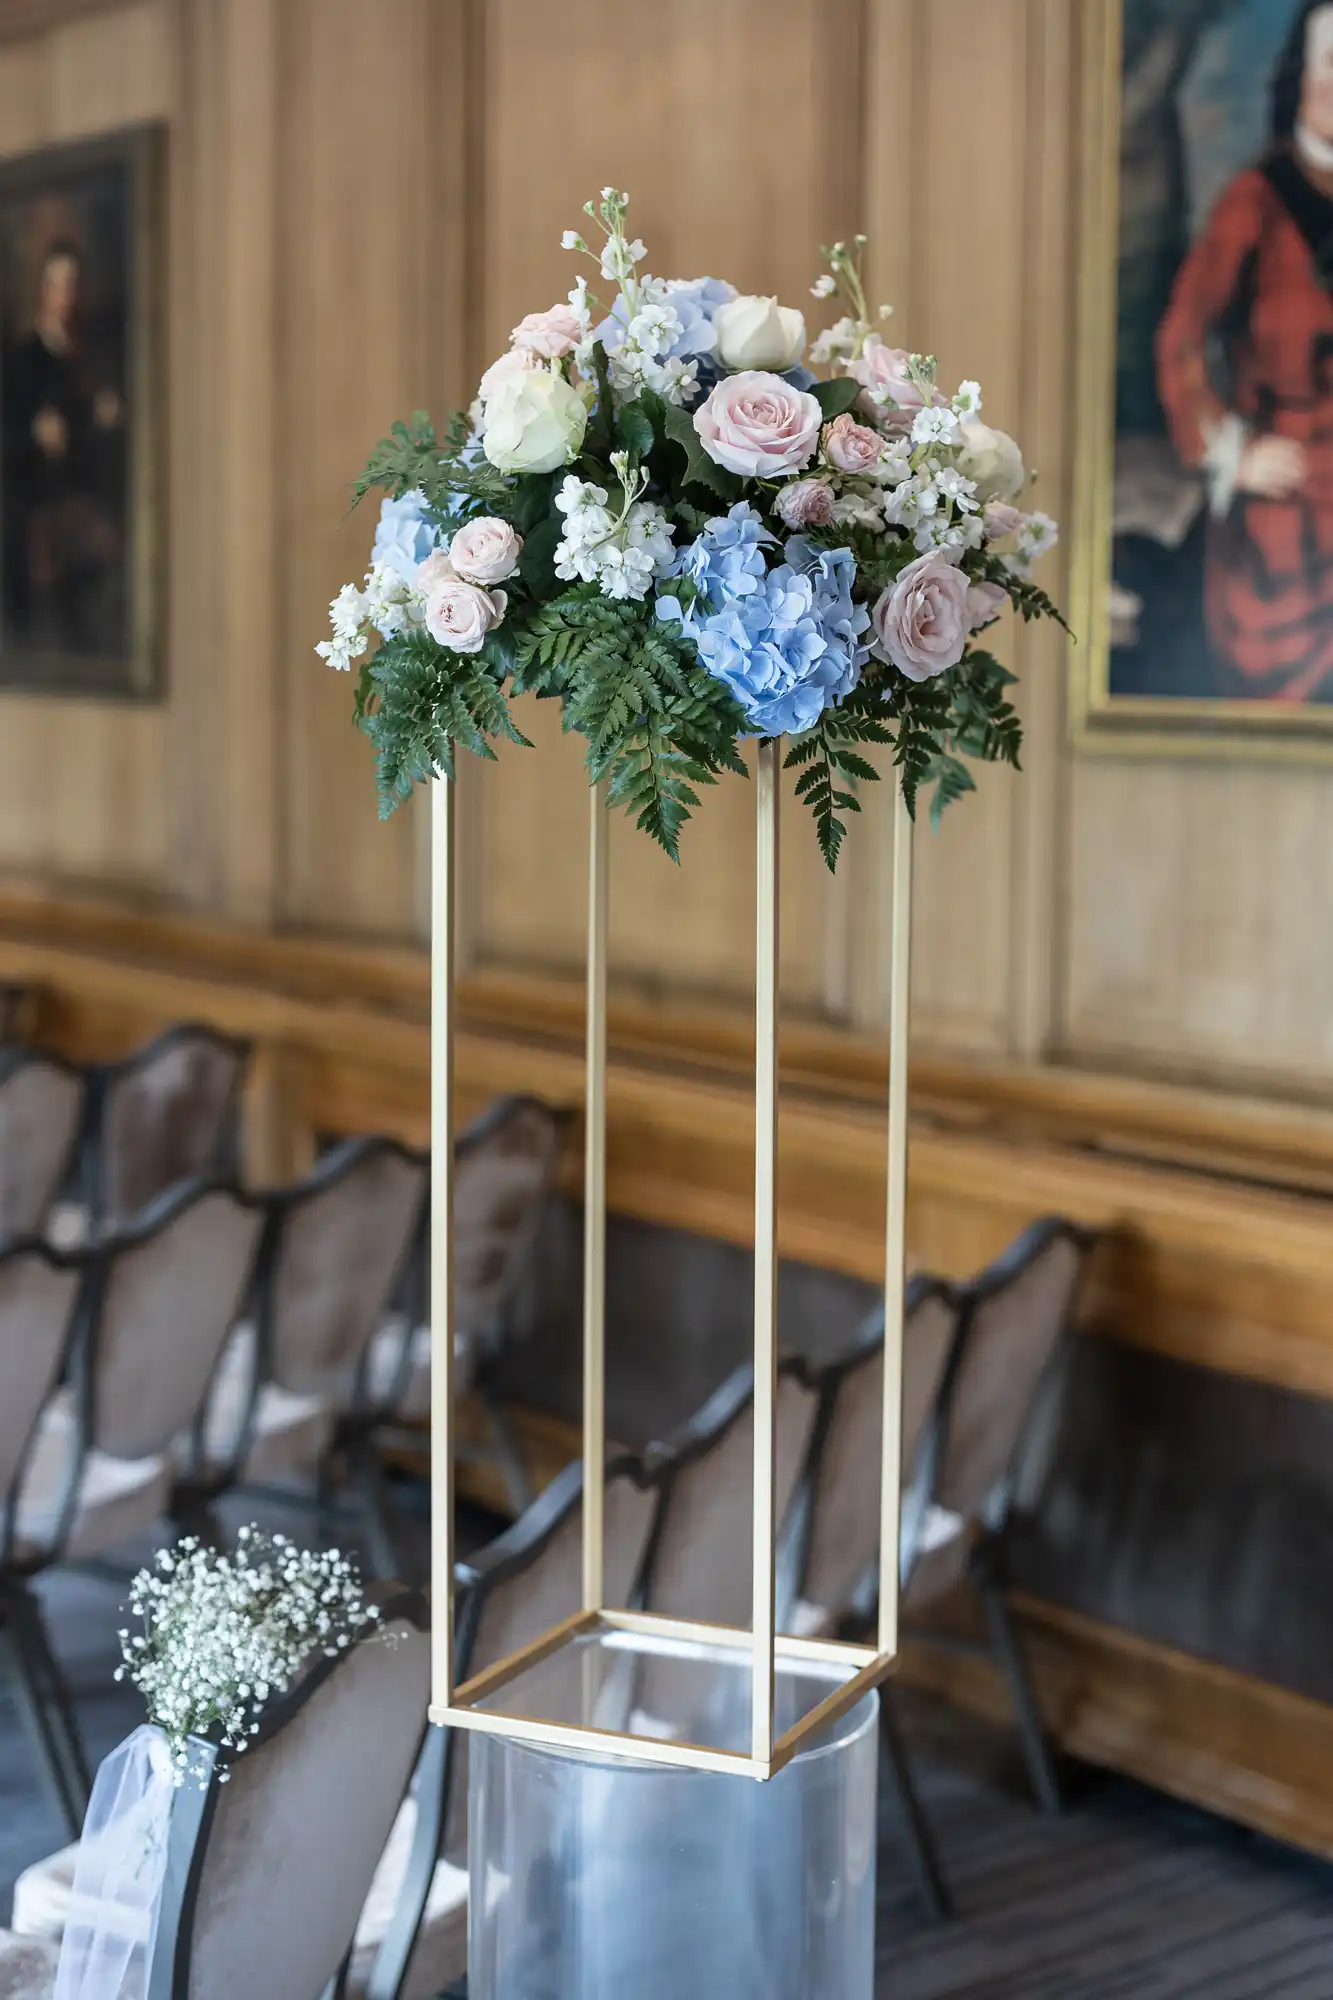 An elegant floral arrangement with pastel roses and hydrangeas atop a tall, gold geometric stand in a vintage room with wooden panels and classic paintings.